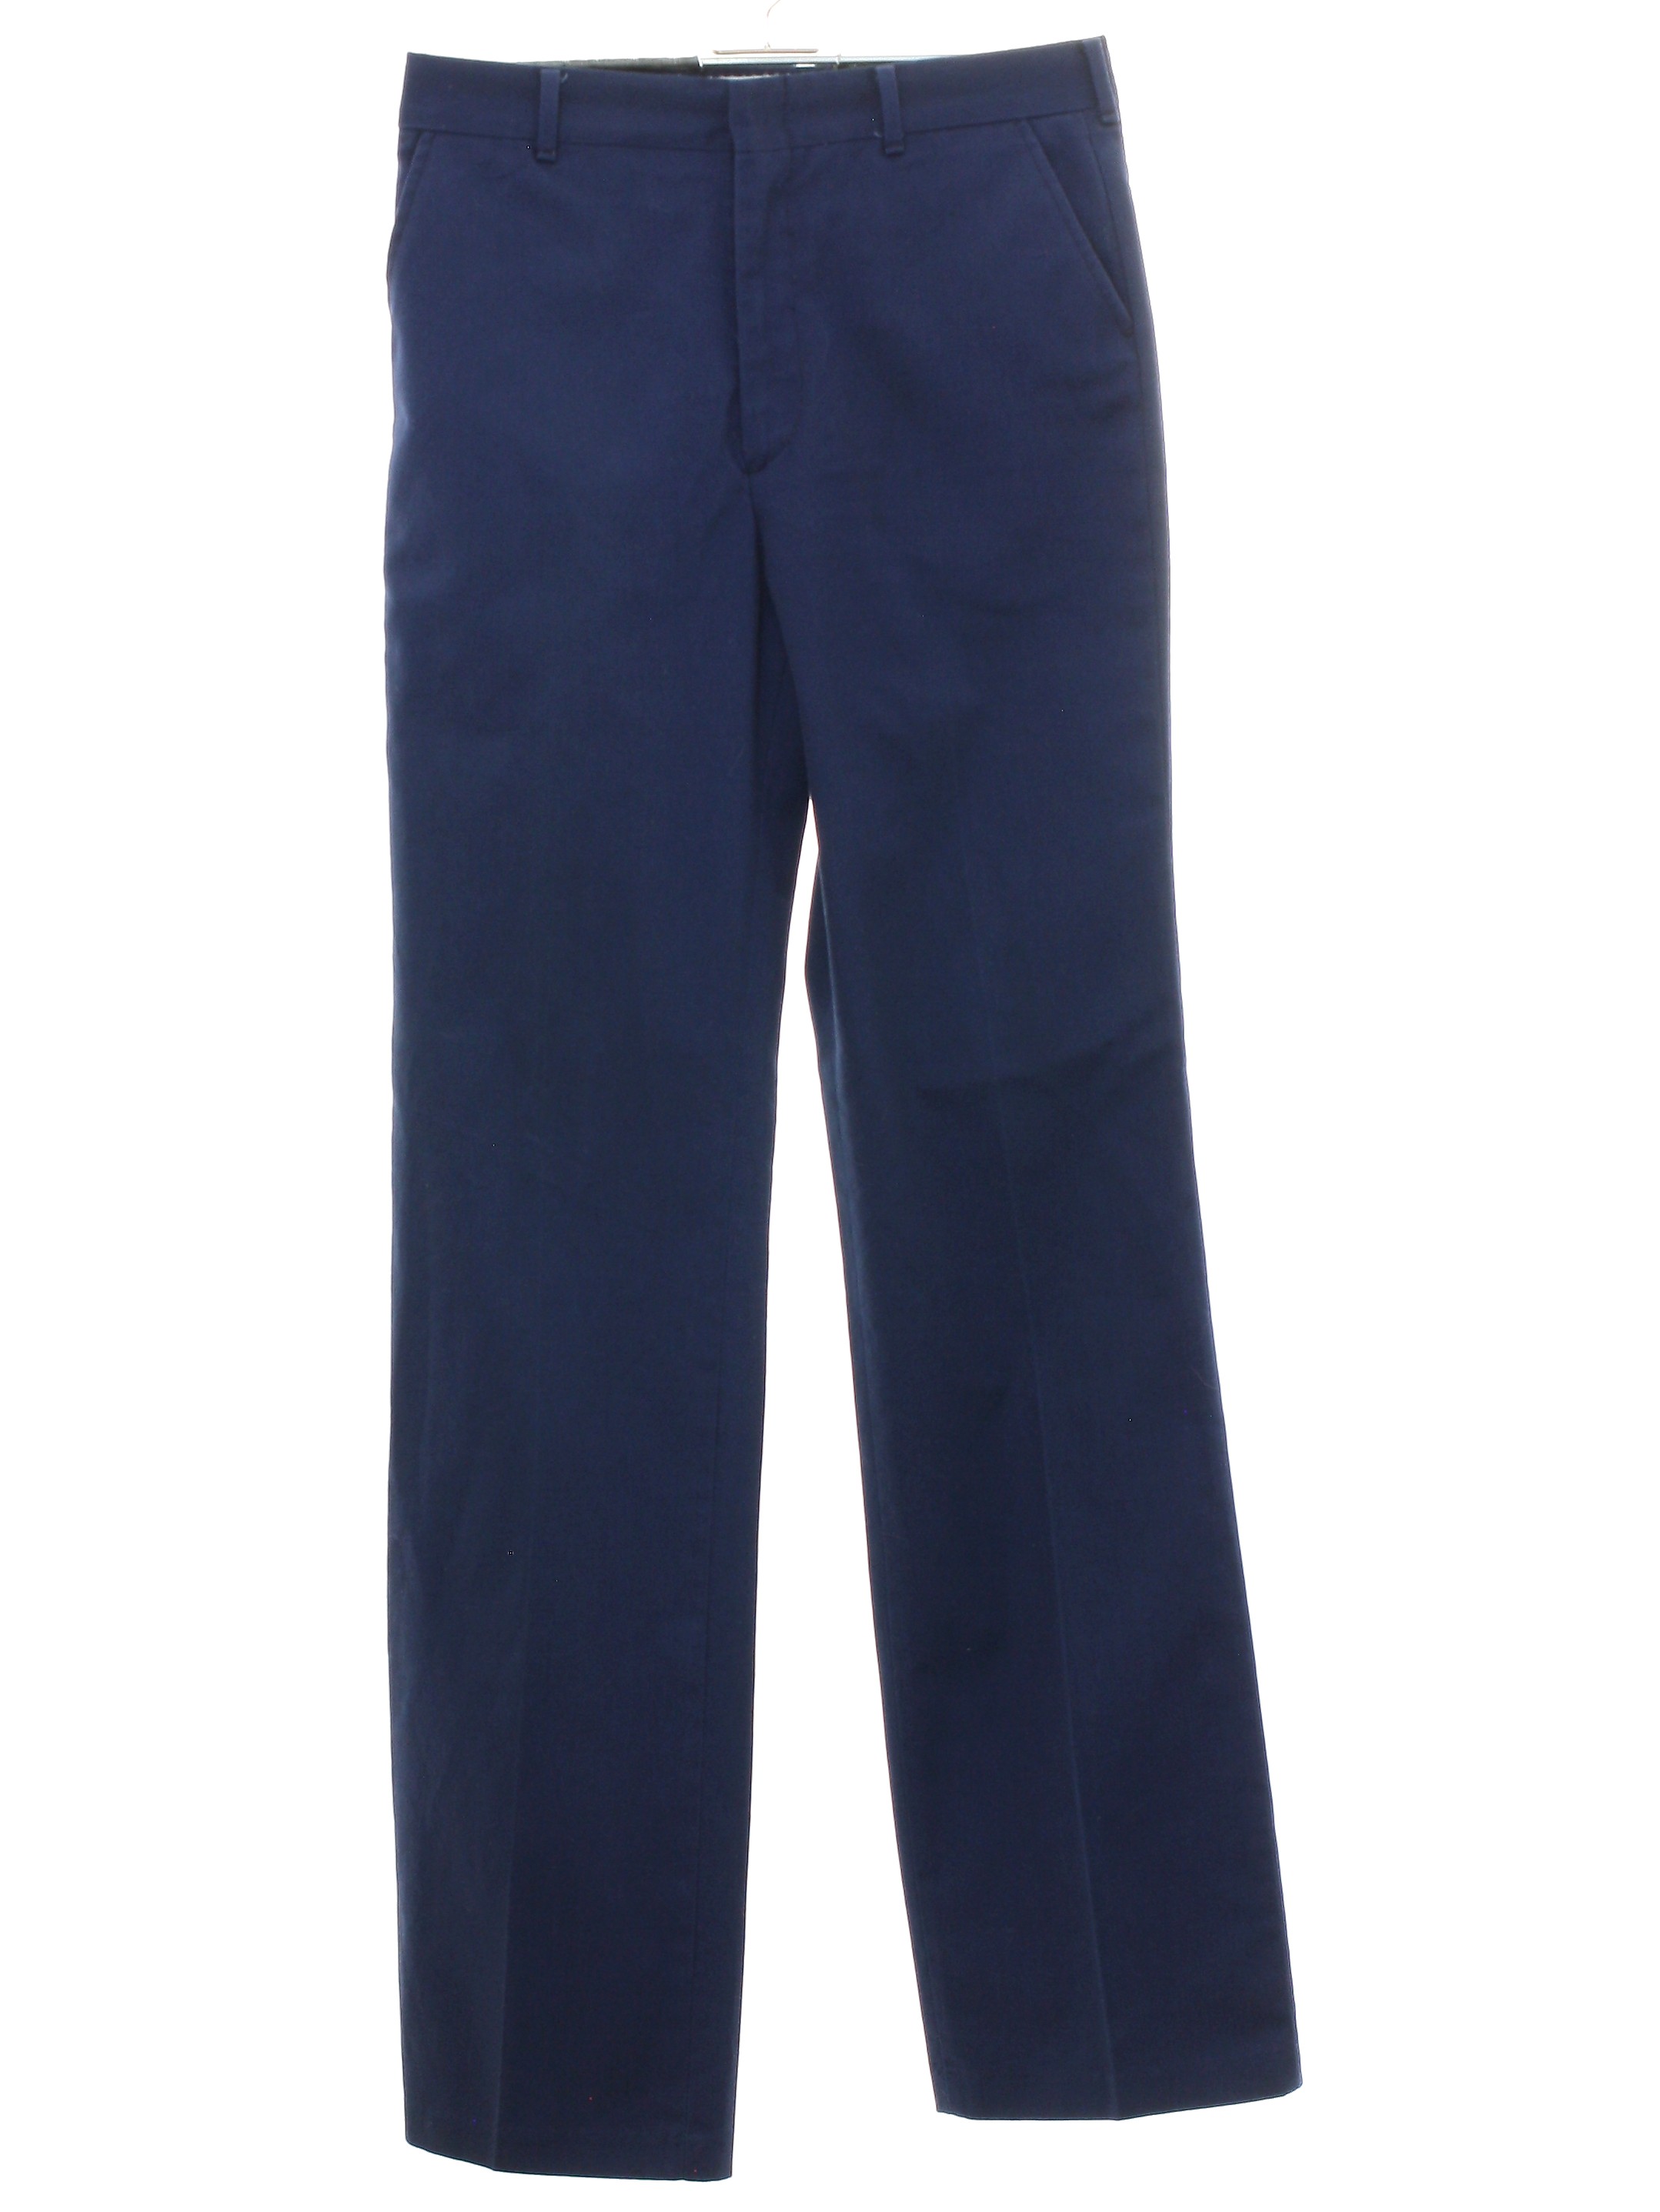 80s Retro Pants: 80s -No Label- Mens navy blue solid colored polyester ...